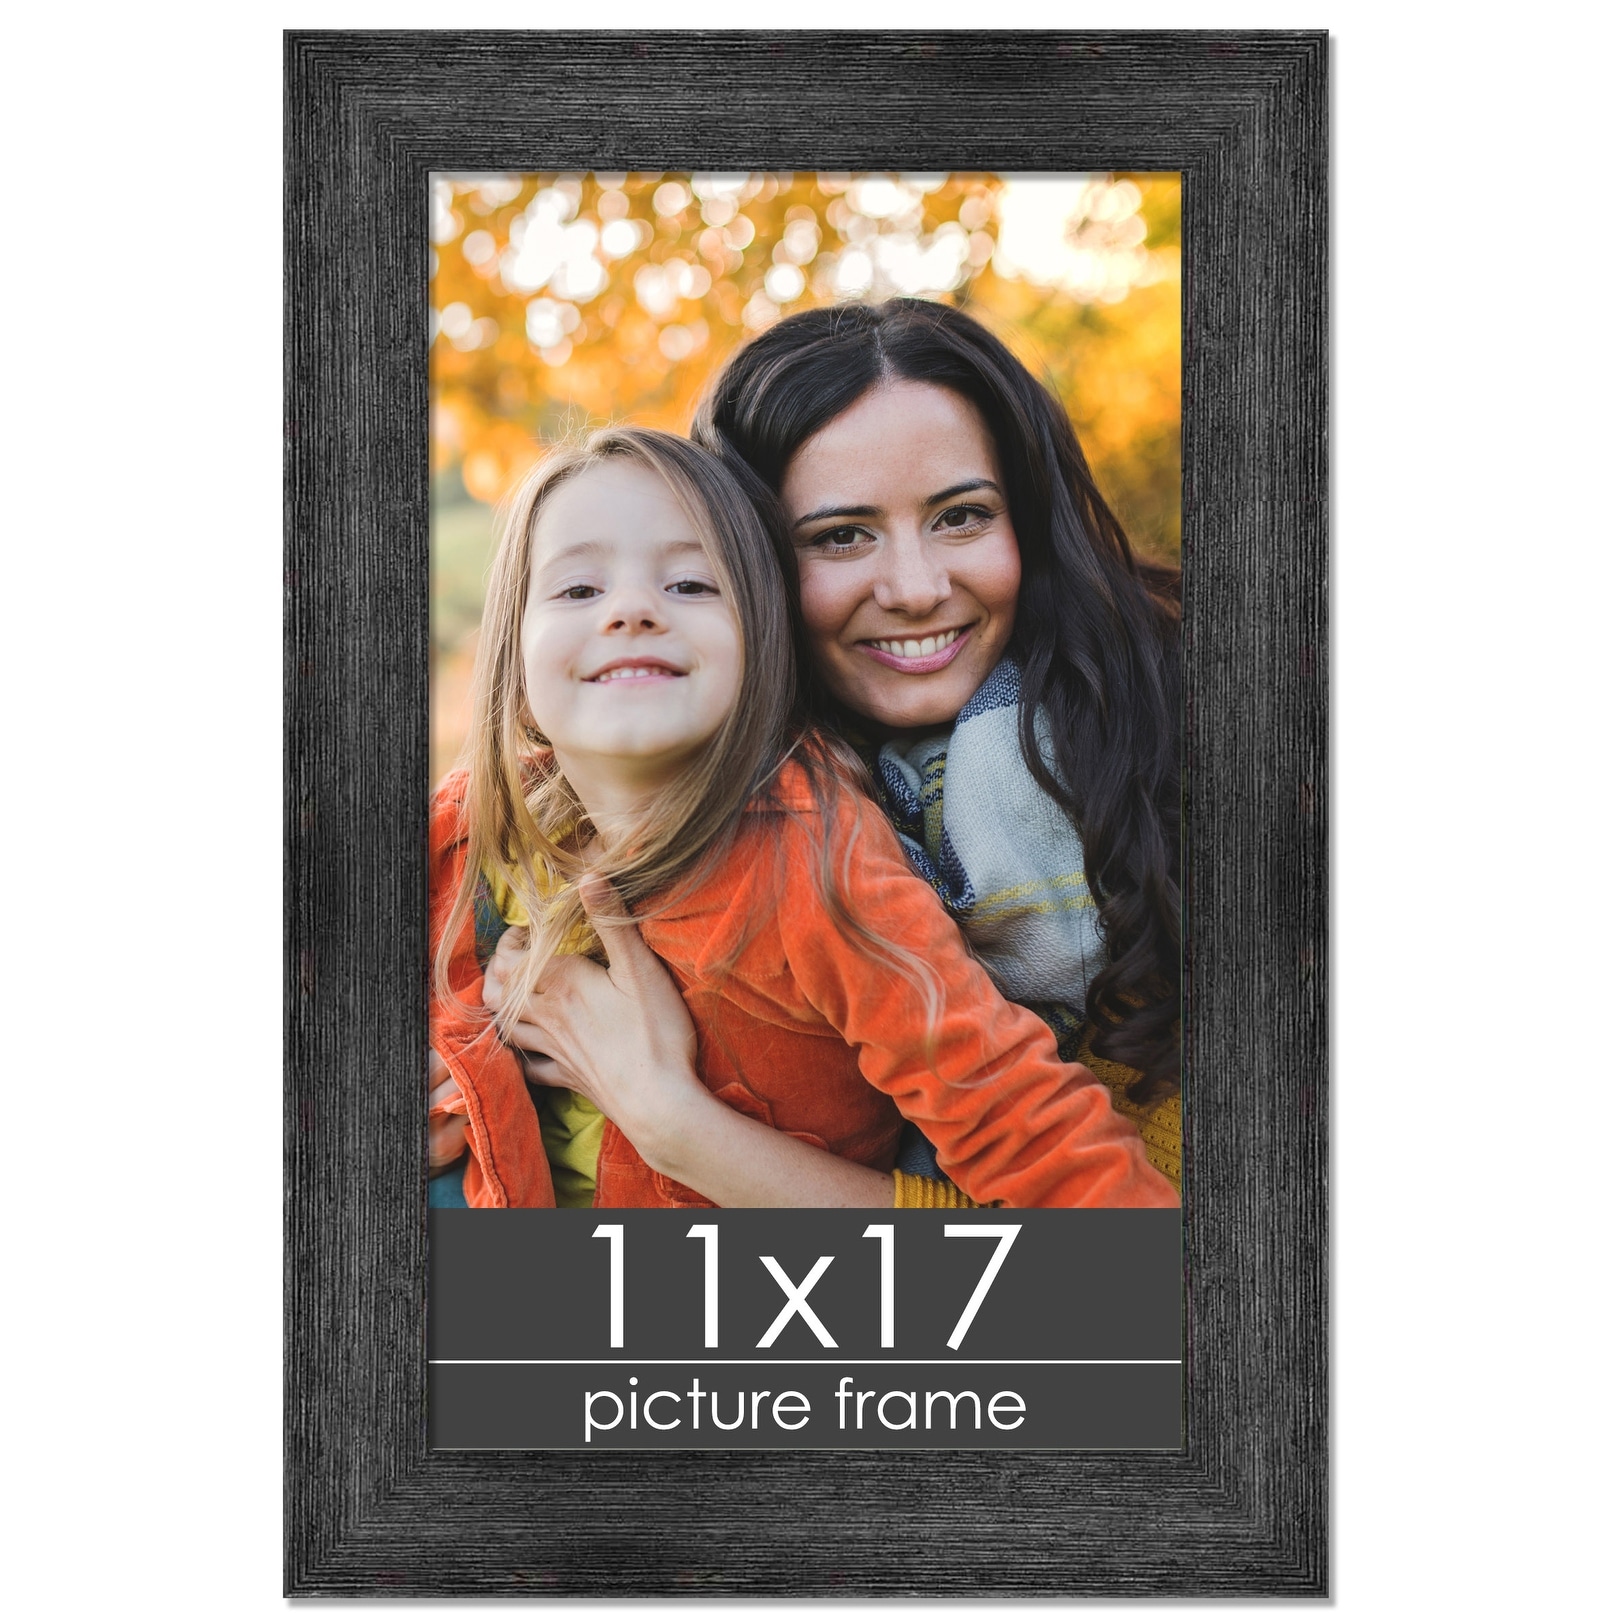 30x40 Frame Black Contemporary Wood Picture Frame - Complete with Frame  Grade Acrylic, Backing, and Hardware